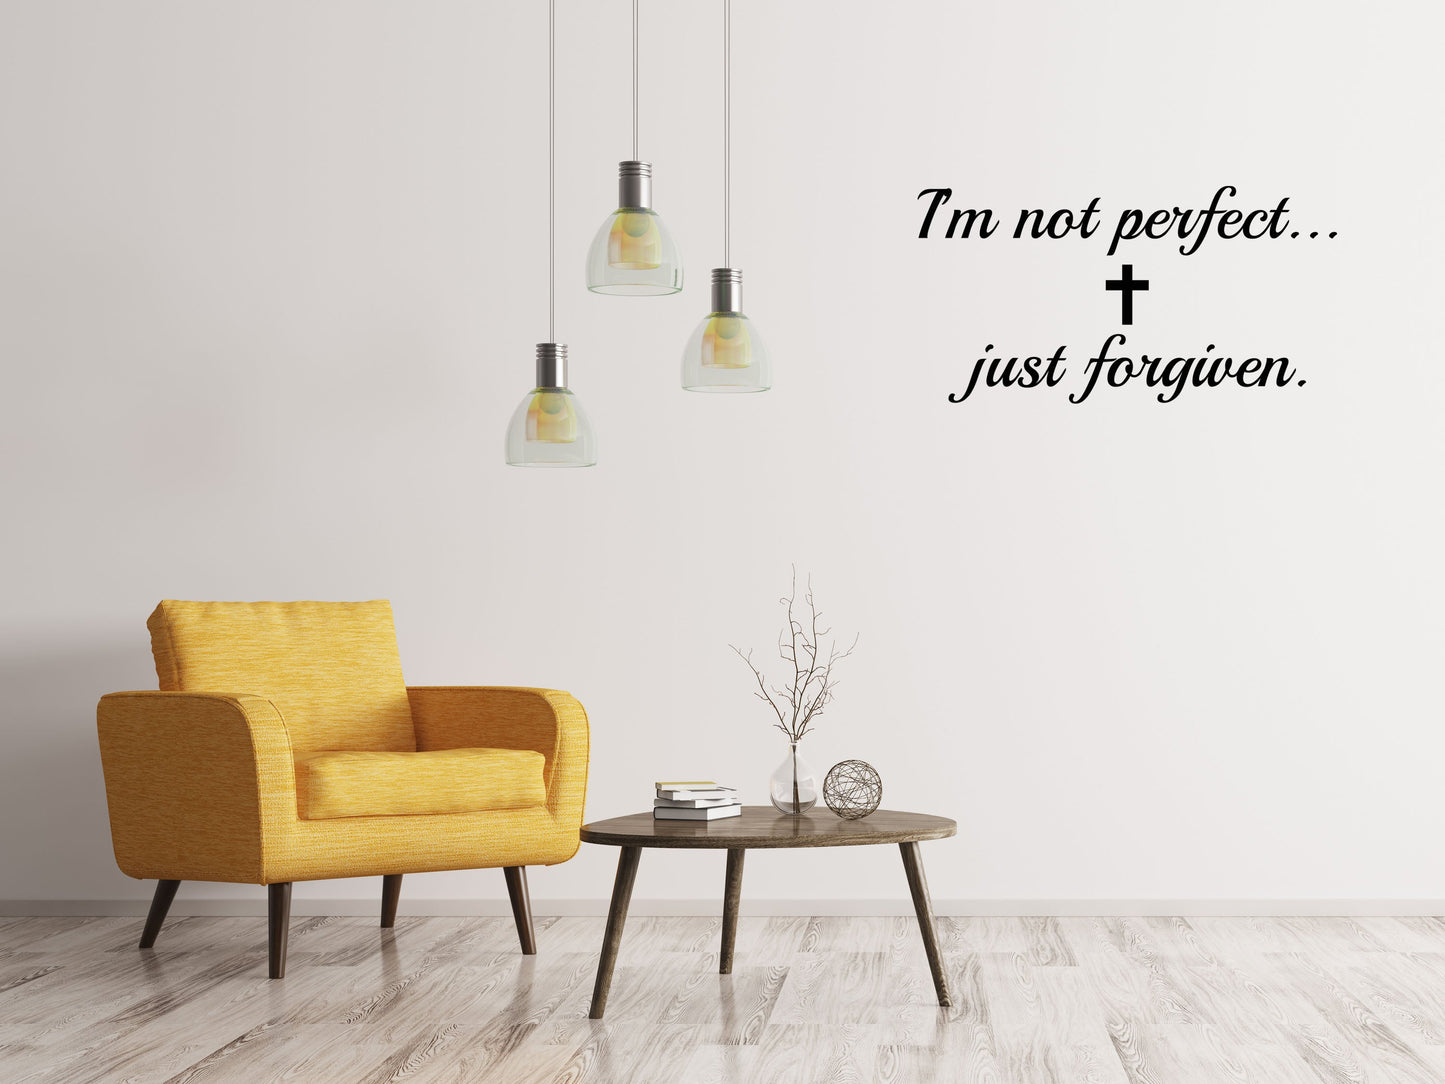 I'm Not Perfect Just Forgiven Vinyl Decal Wall Decal Custom Wall Custom Quote Verse Wall Decal Home Just Forgiven Sign Just Forgiven Decal Vinyl Wall Decal Done 